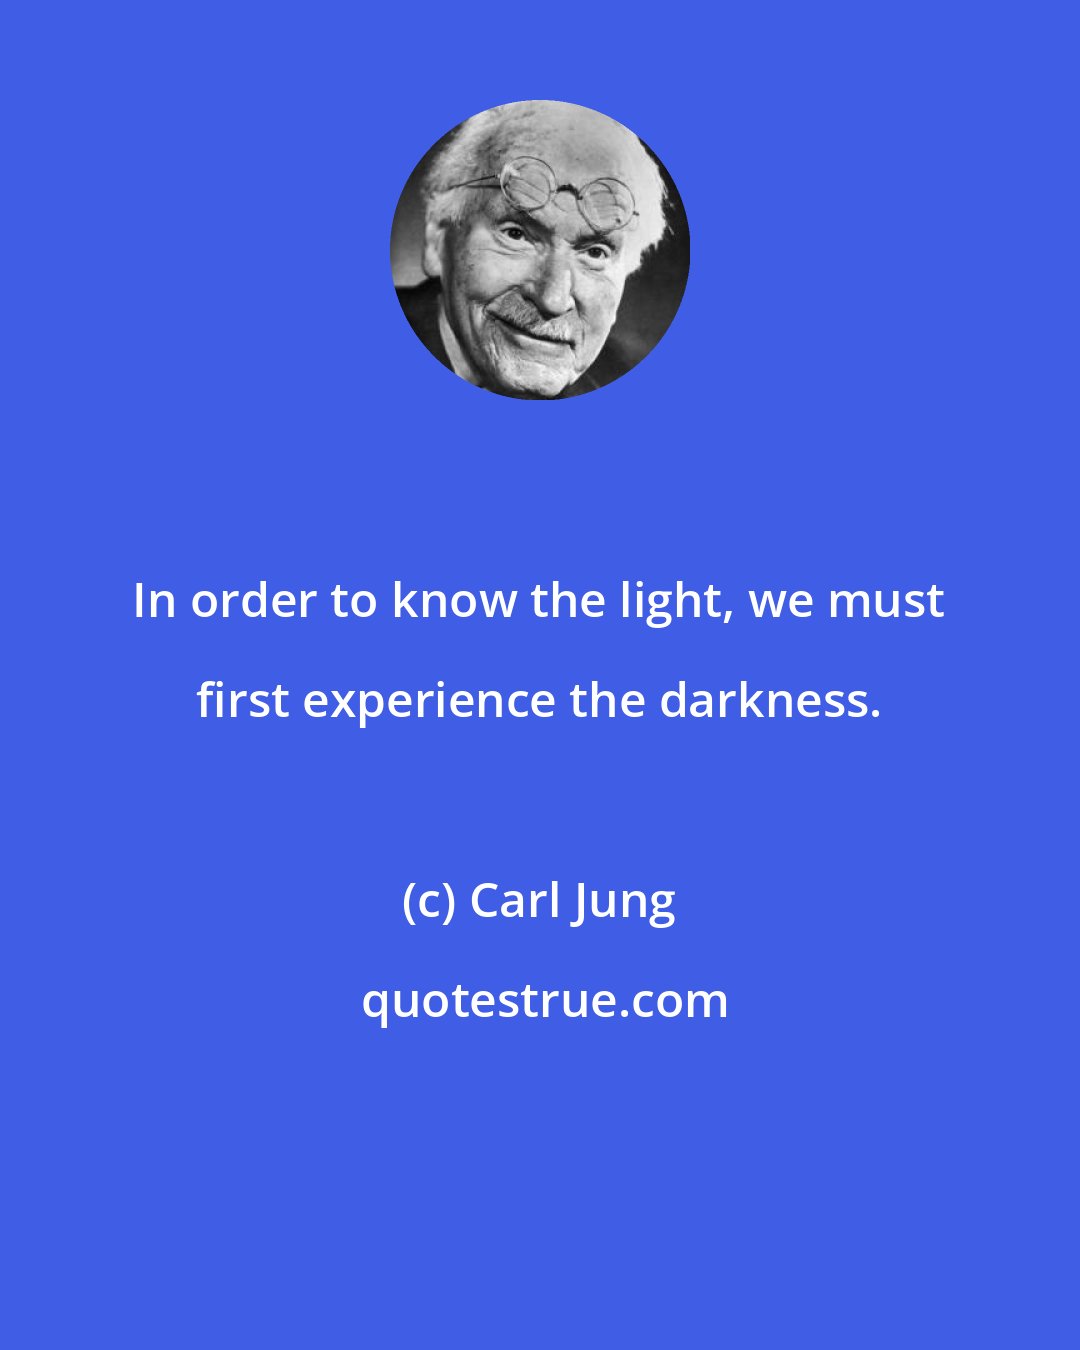 Carl Jung: In order to know the light, we must first experience the darkness.